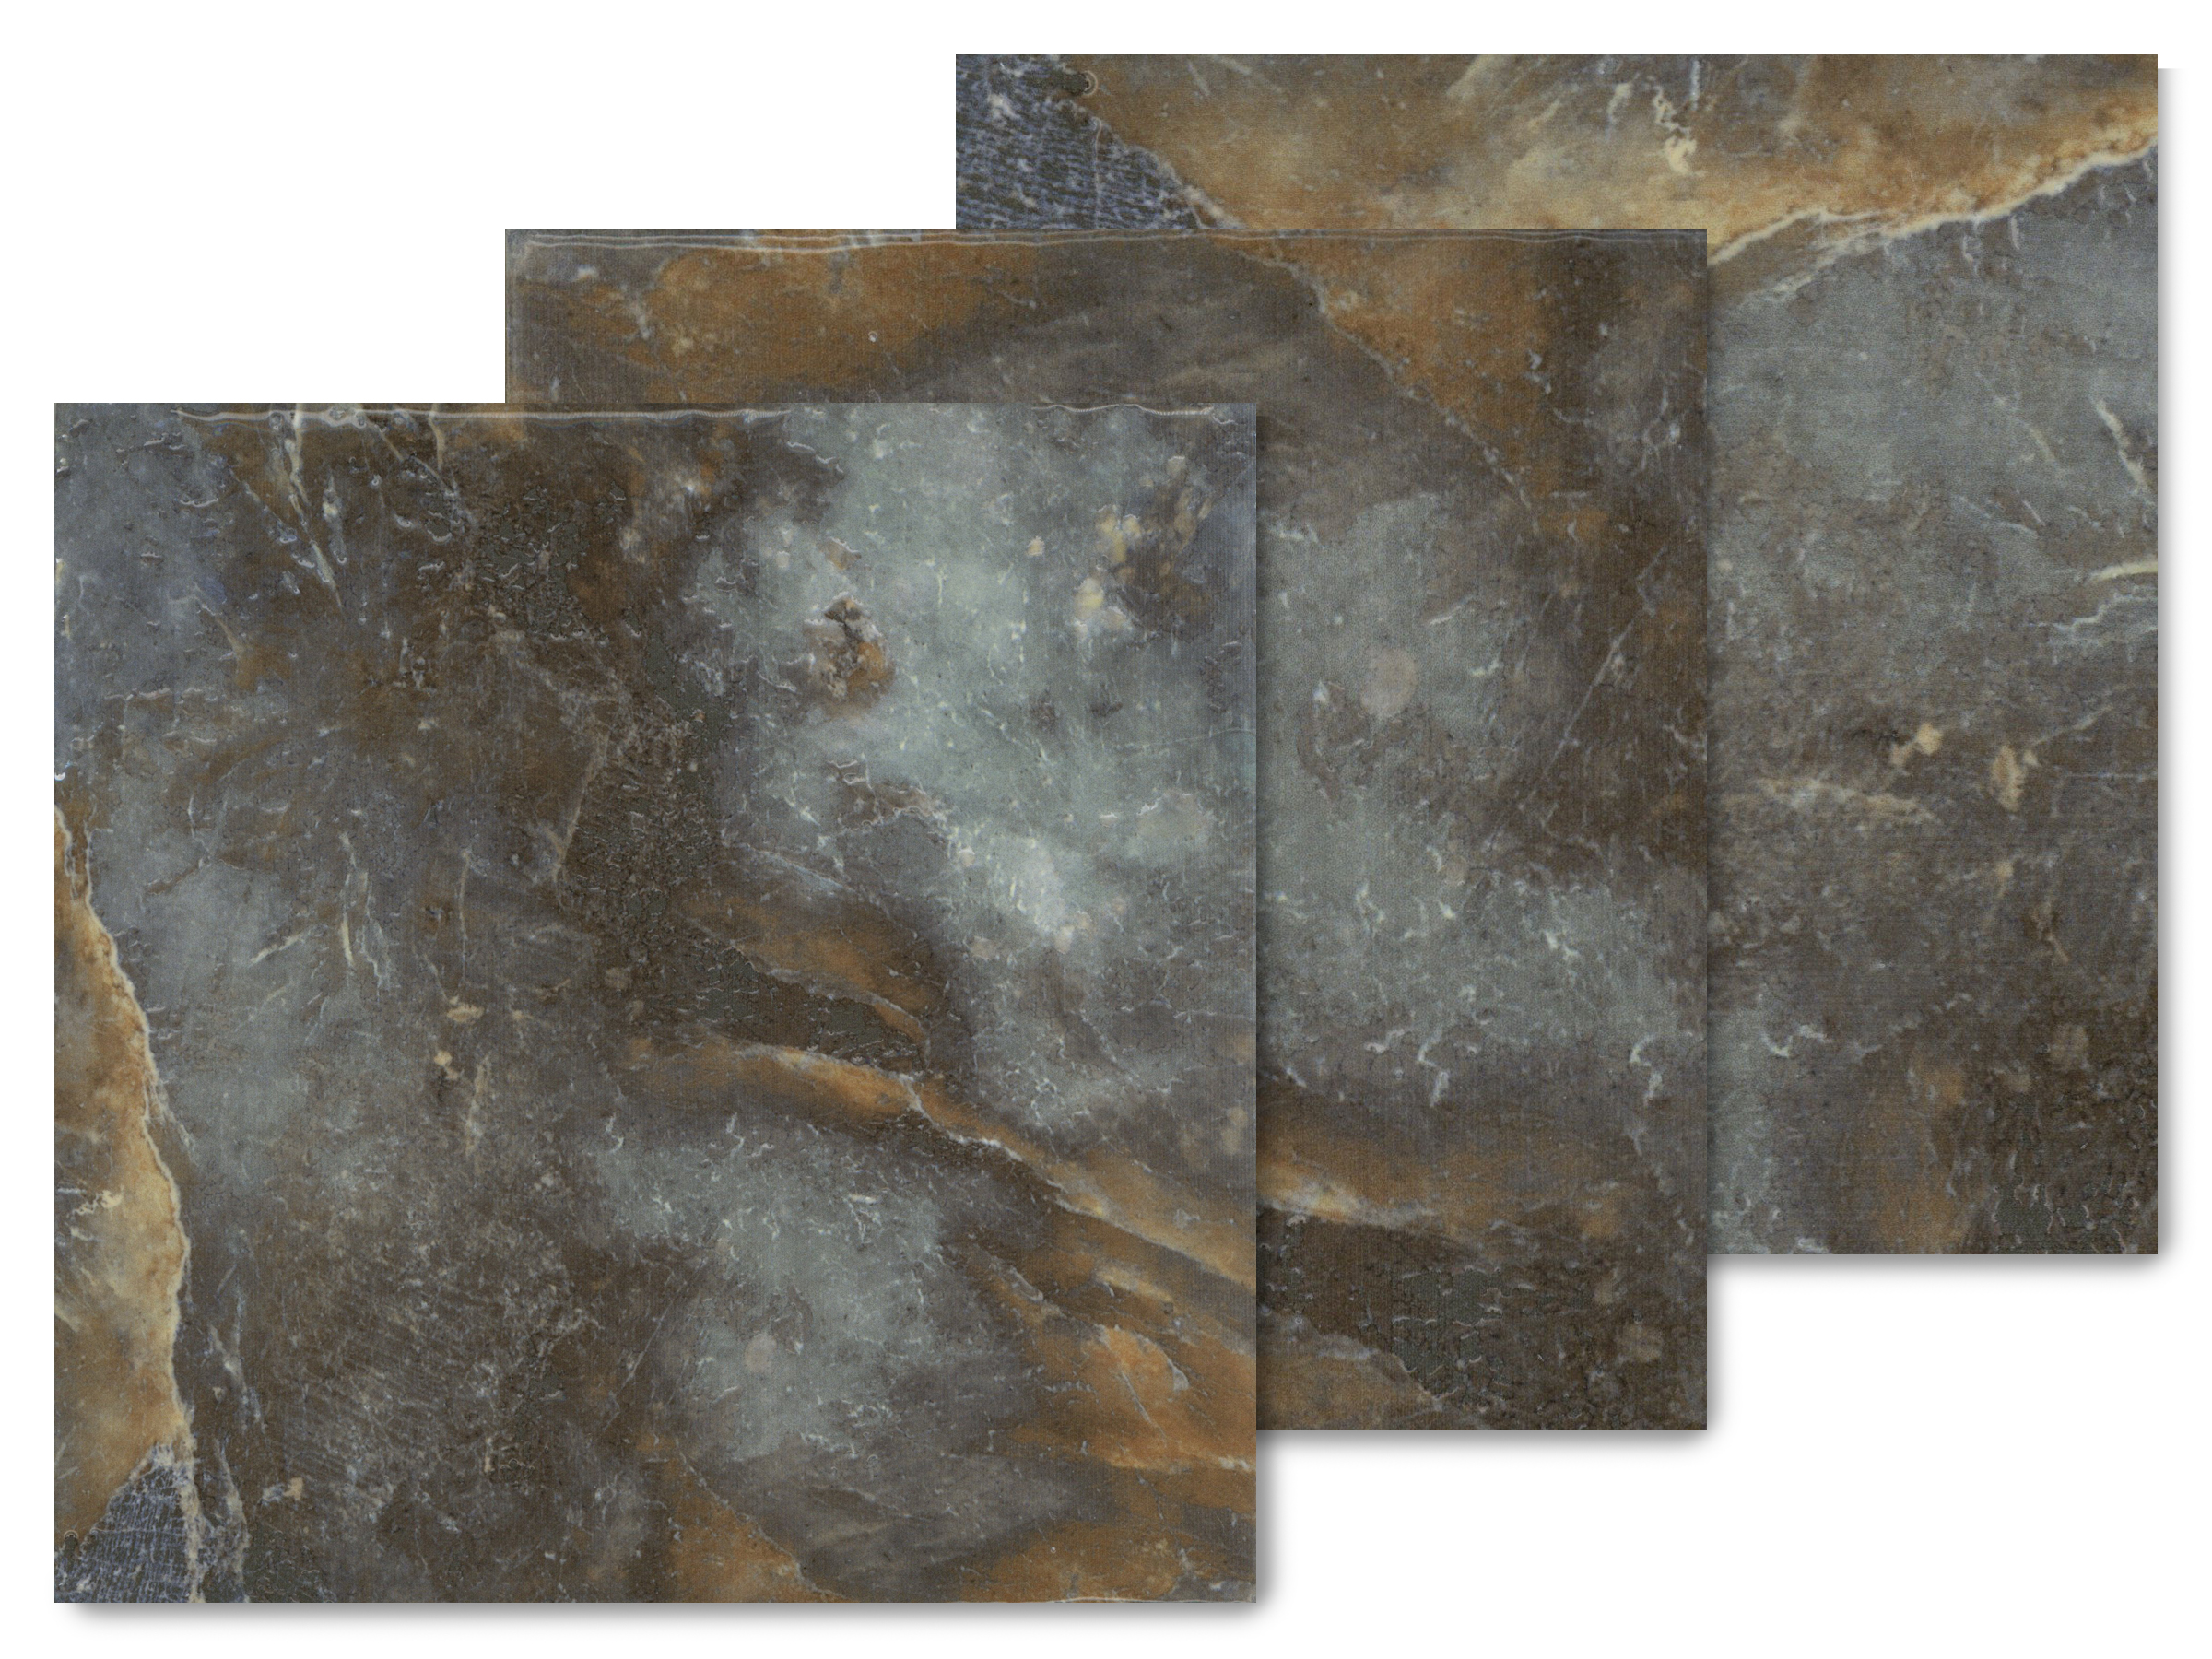 Nepal 6 inch by 6 inch tile